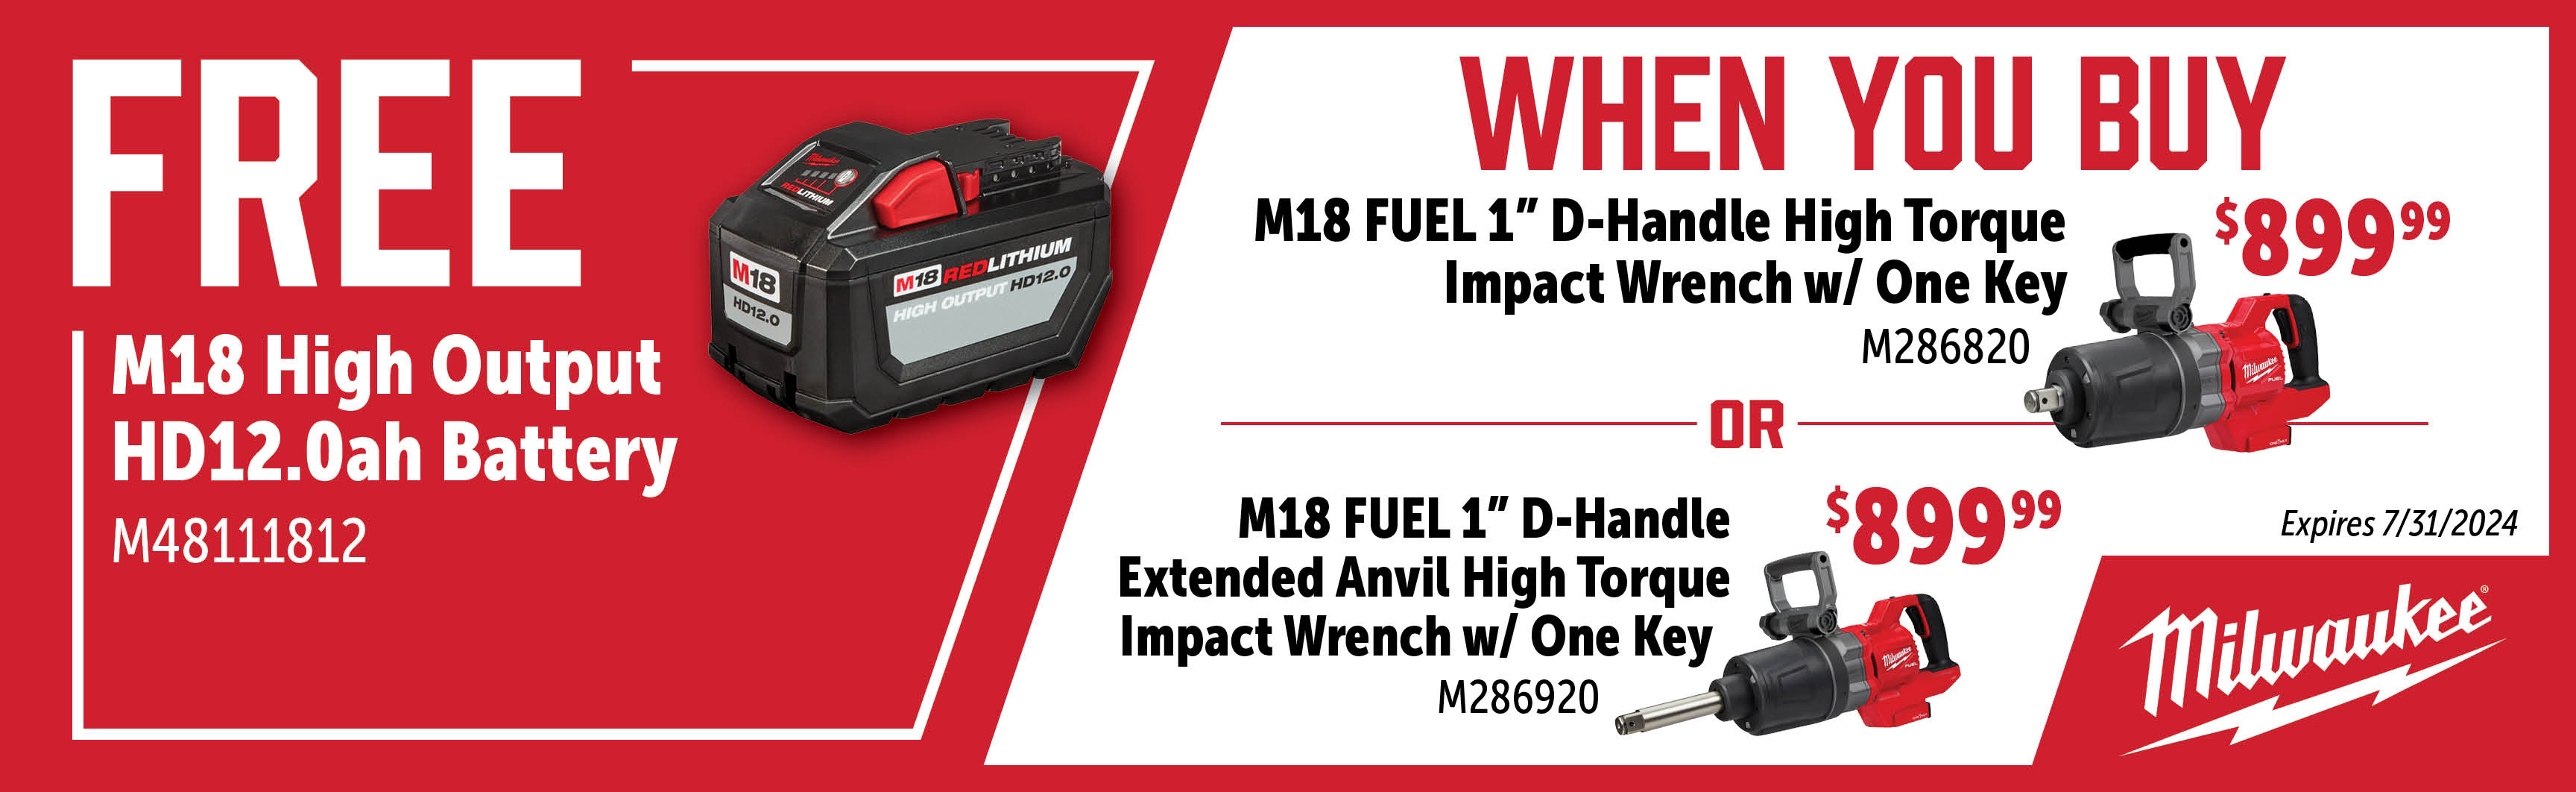 Milwaukee May - July: Buy a M286820 or M286920 and Get a Free M48111812